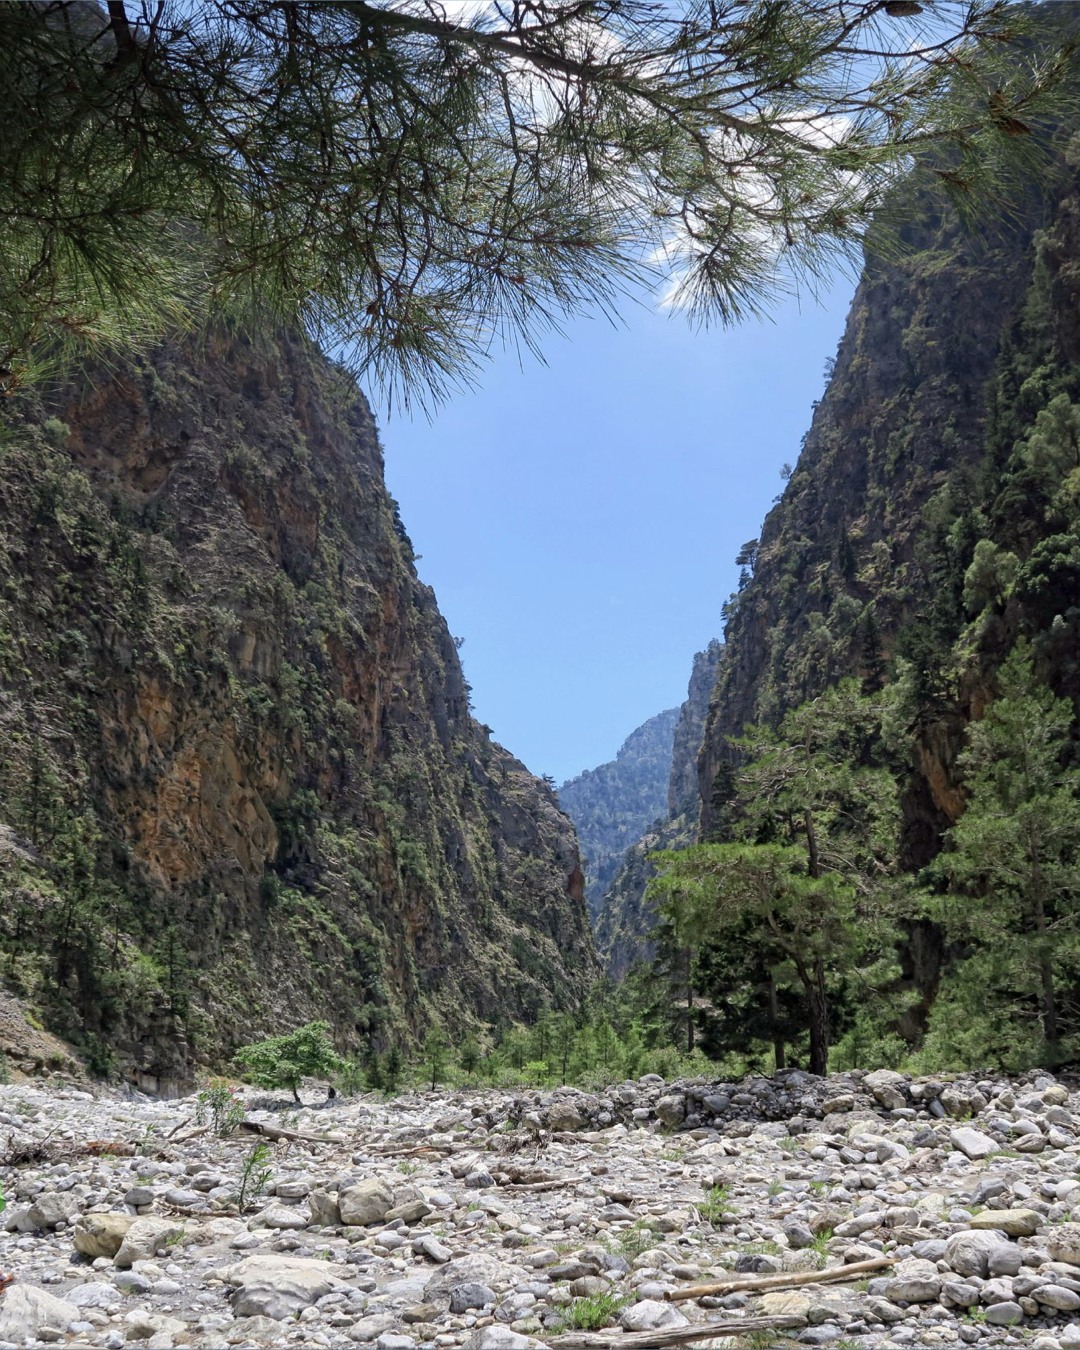 Love nature? 🌿 You will certainly fall in love with Crete, Greece’s ultimate hiker’s paradise. Reach the island with #FlyCycladic and immerse yourself in the most amazing adventures at the impressive Samaria Gorge. 🏞️ Book your adventure today! 

#FlyCycladic #CloserThanEver #NewFlightSchedule #traveller #Greece #greekislands #flycessna #wu_greece #reasonstovisitgreece #athensvoice #ilovegreece #travel_greece #luxuryworldtraveler #cycladicair #flywithus #aviation_daily #aviationlovers #aviationphotography #cessnacaravan208 #greecestagram #discovergreece #visitgreece #vacations #incredible_europe #theworldfromabove #crete #samaria #samariagorge #hiking